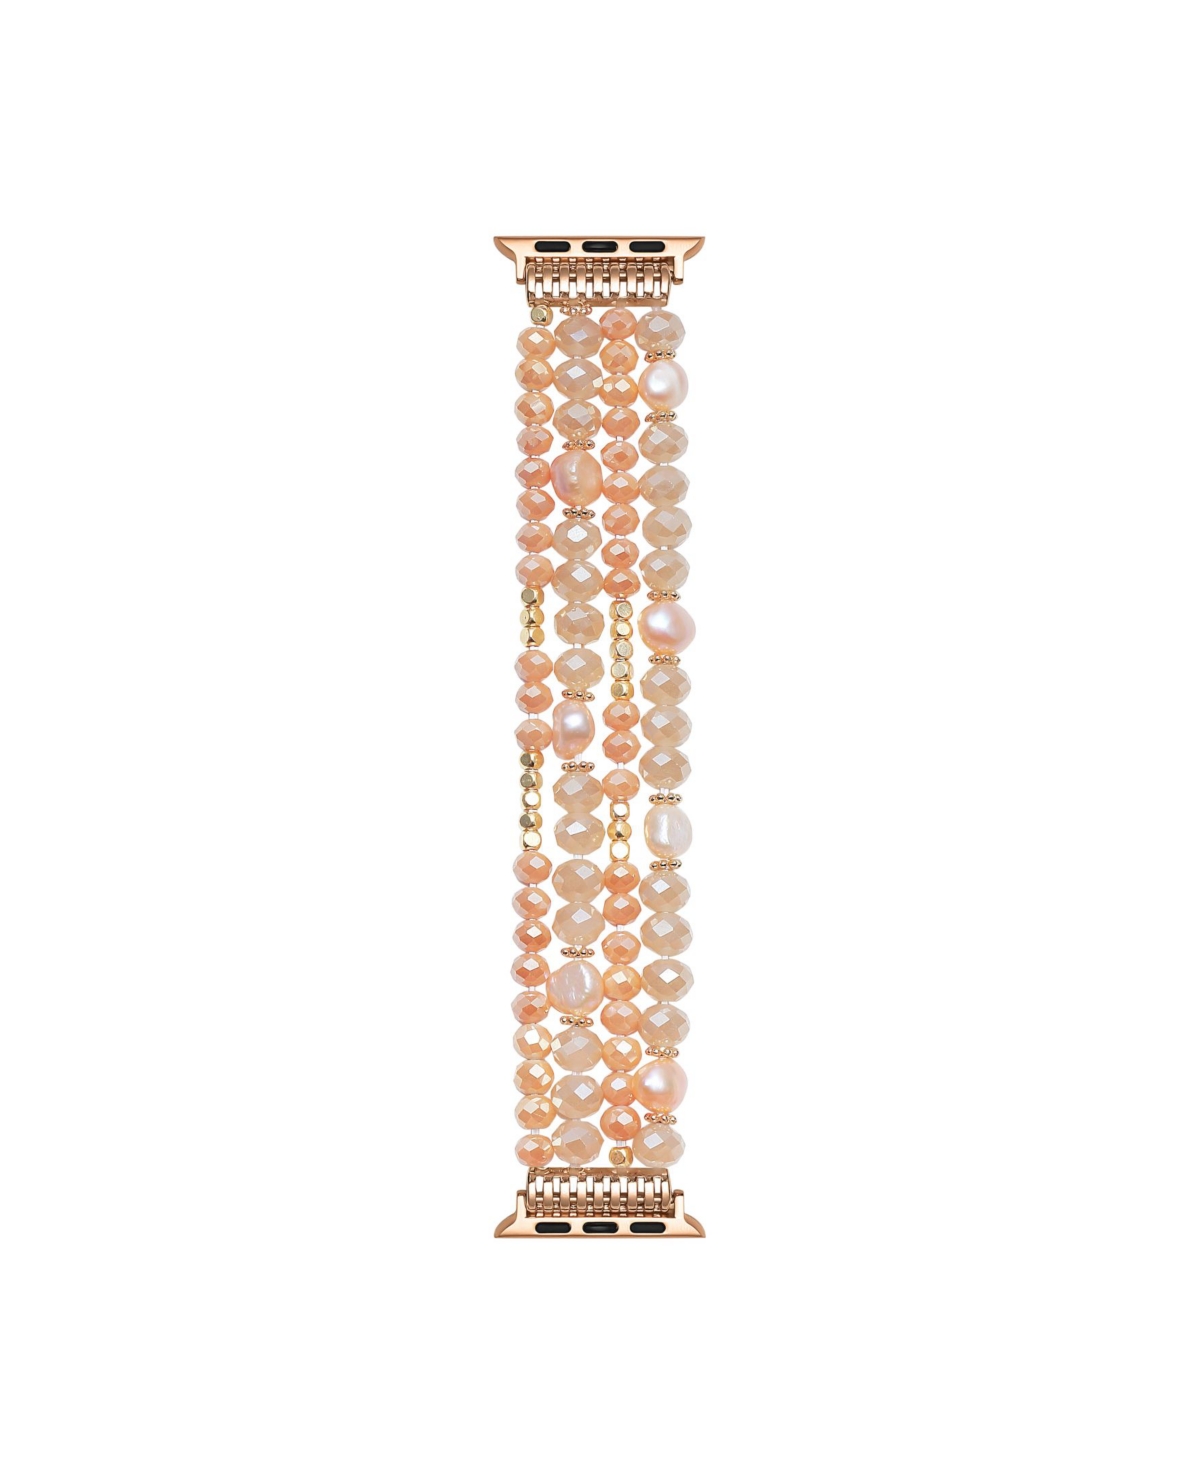 Demi Rose Gold Plated Beaded Bracelet Band for Apple Watch, 42mm-44mm - Rose Gold Plated